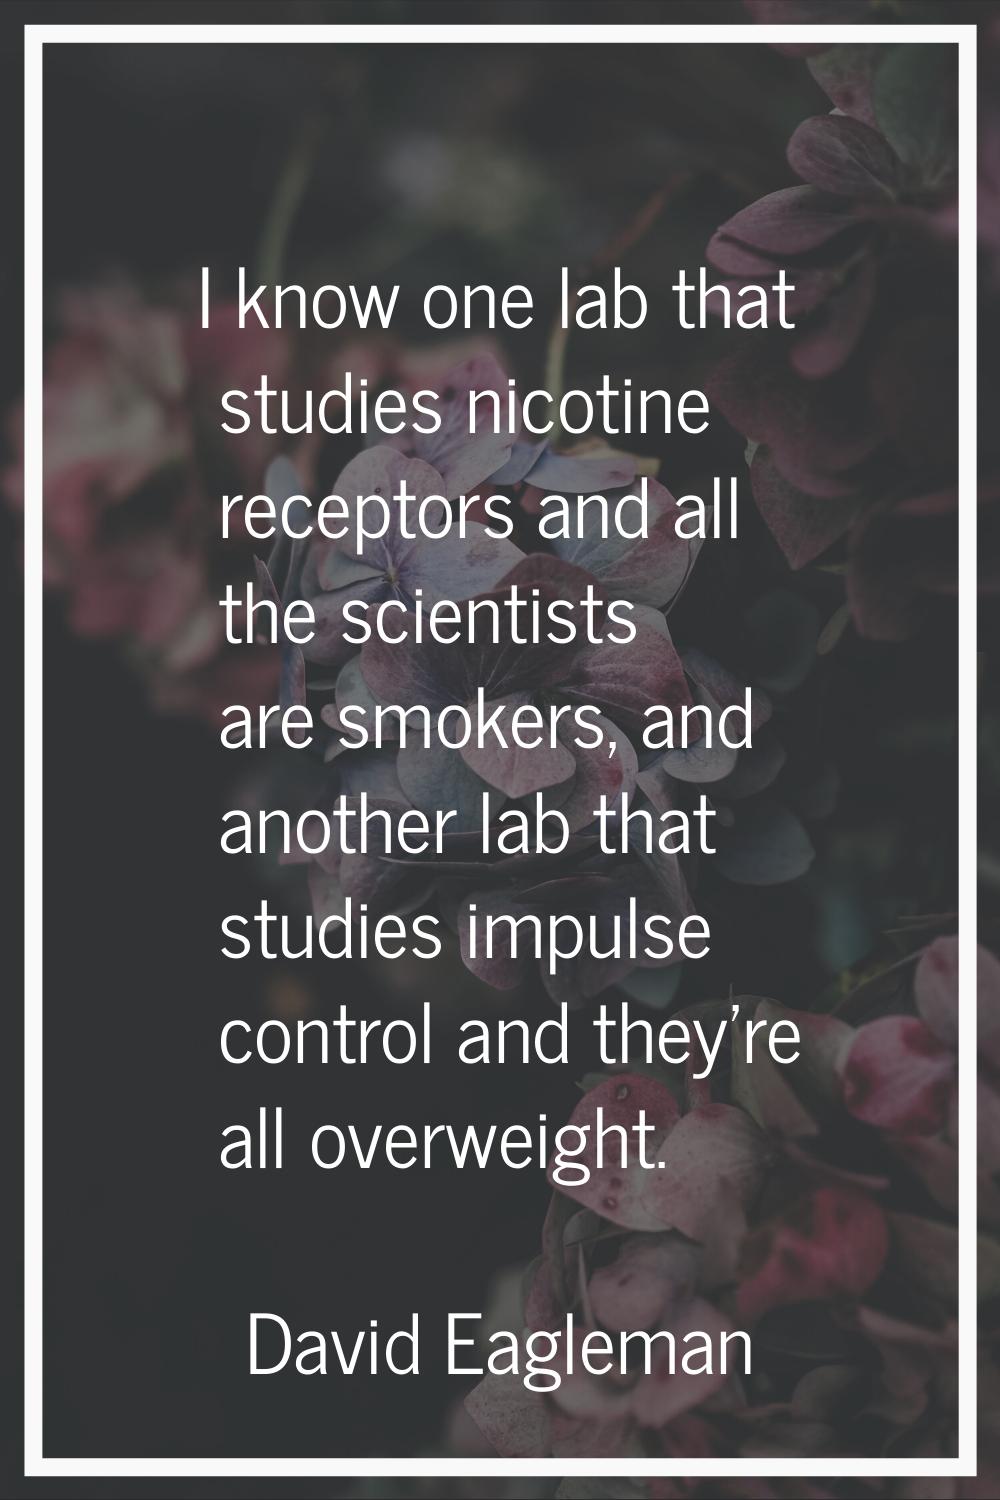 I know one lab that studies nicotine receptors and all the scientists are smokers, and another lab 